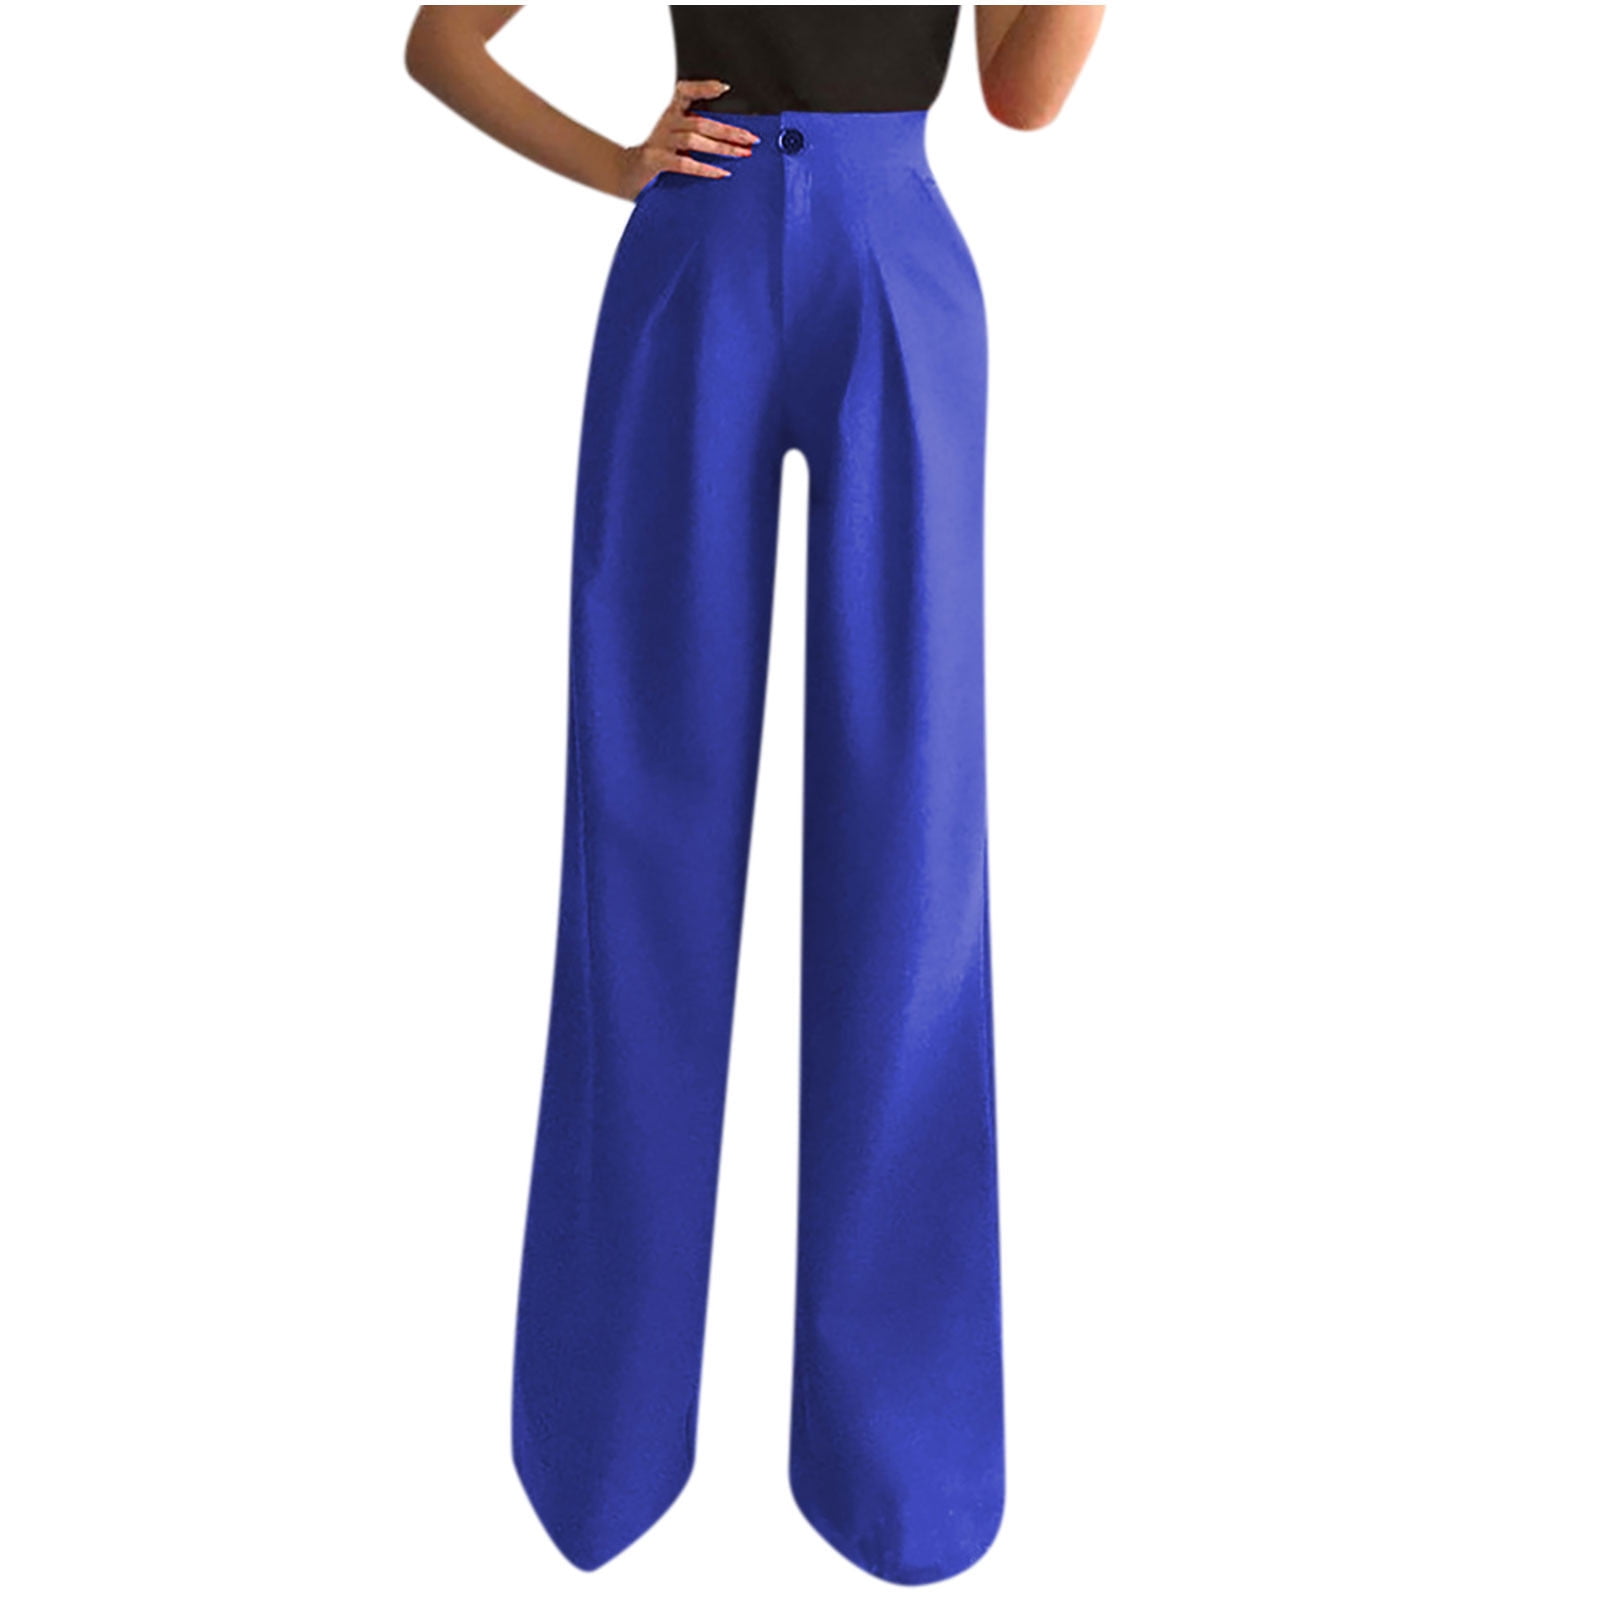 Women's Work Straight High Waist Chinos Button Down Straight Long Trousers  Pants Pants Suit Pants Work Pants Women's Casual Pants Dark Blue L 